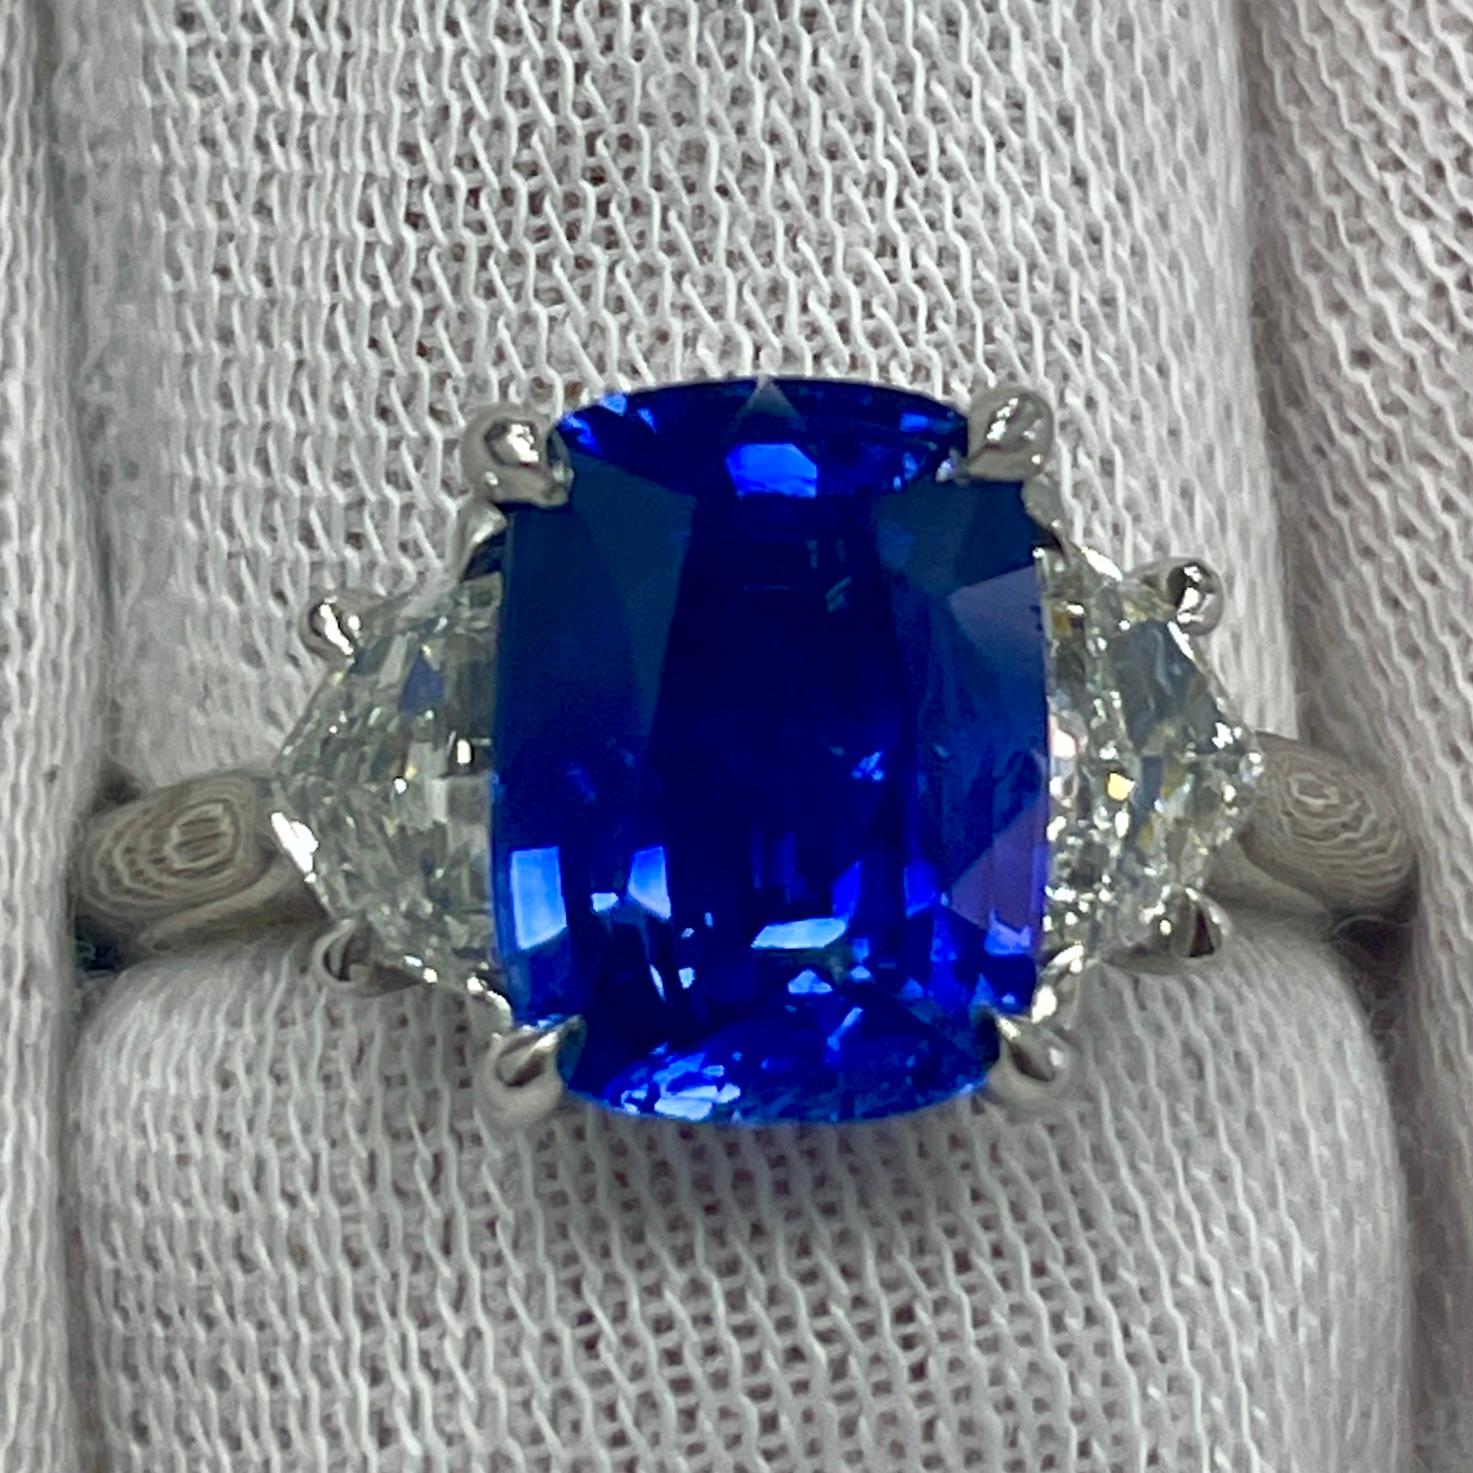 This is a cornflower blue cushion sapphire mounted in an elegant platinum ring with 0.69Ct of brilliant white diamonds. Suitable for any occasion!